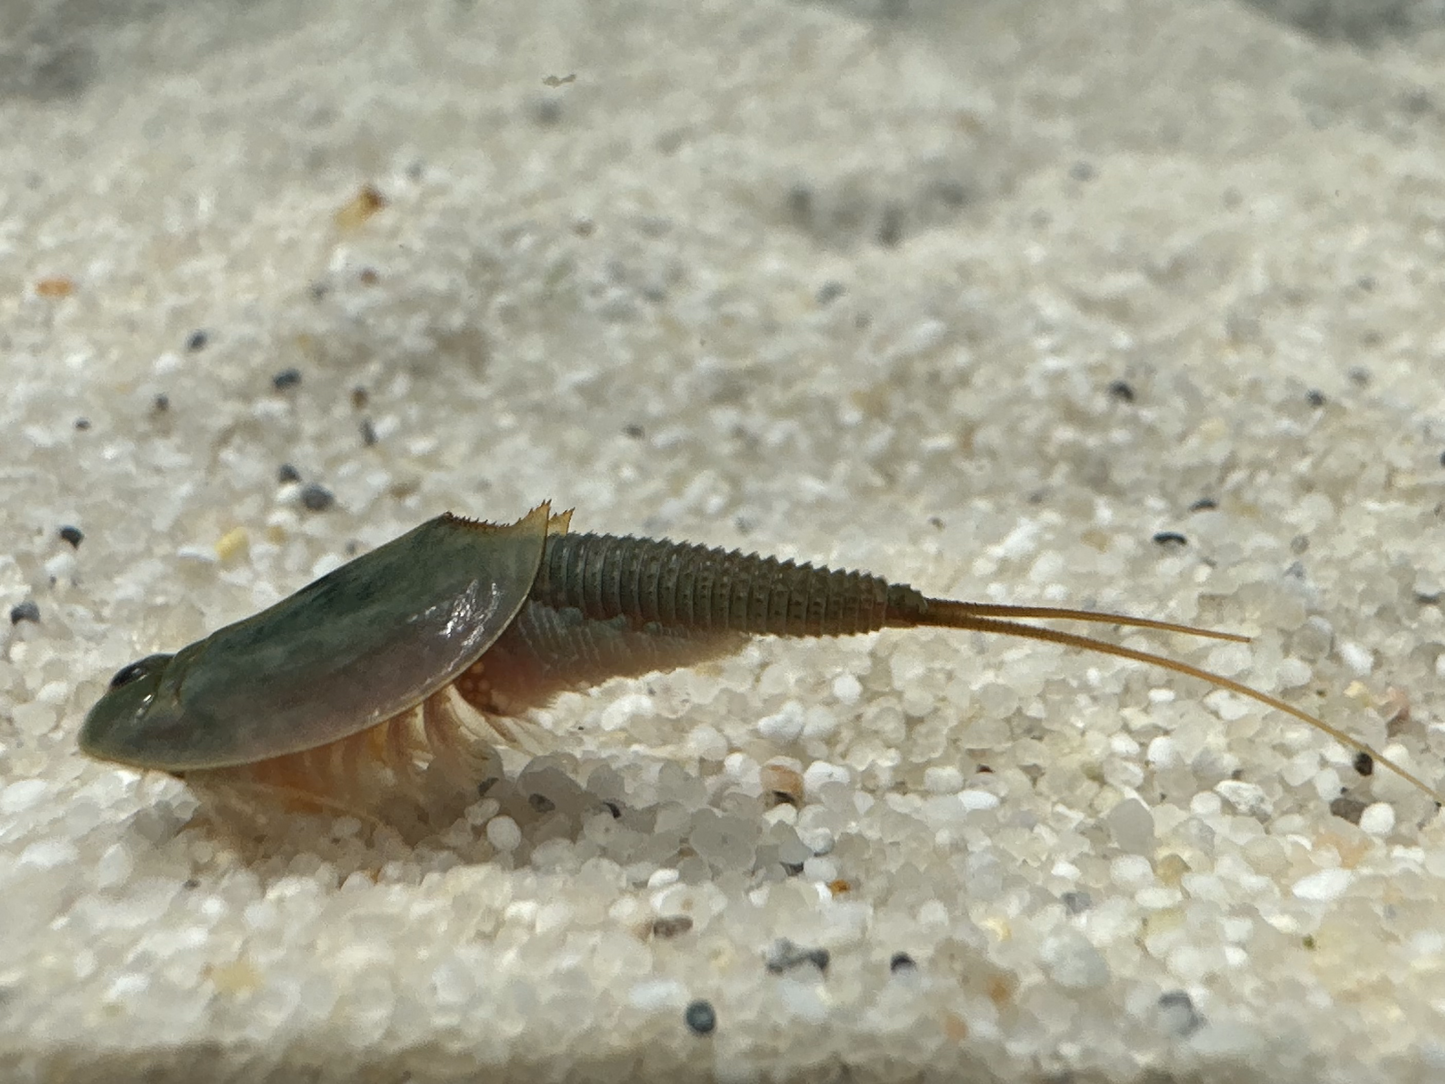 Breeding approach Triops Australiasis green including food and